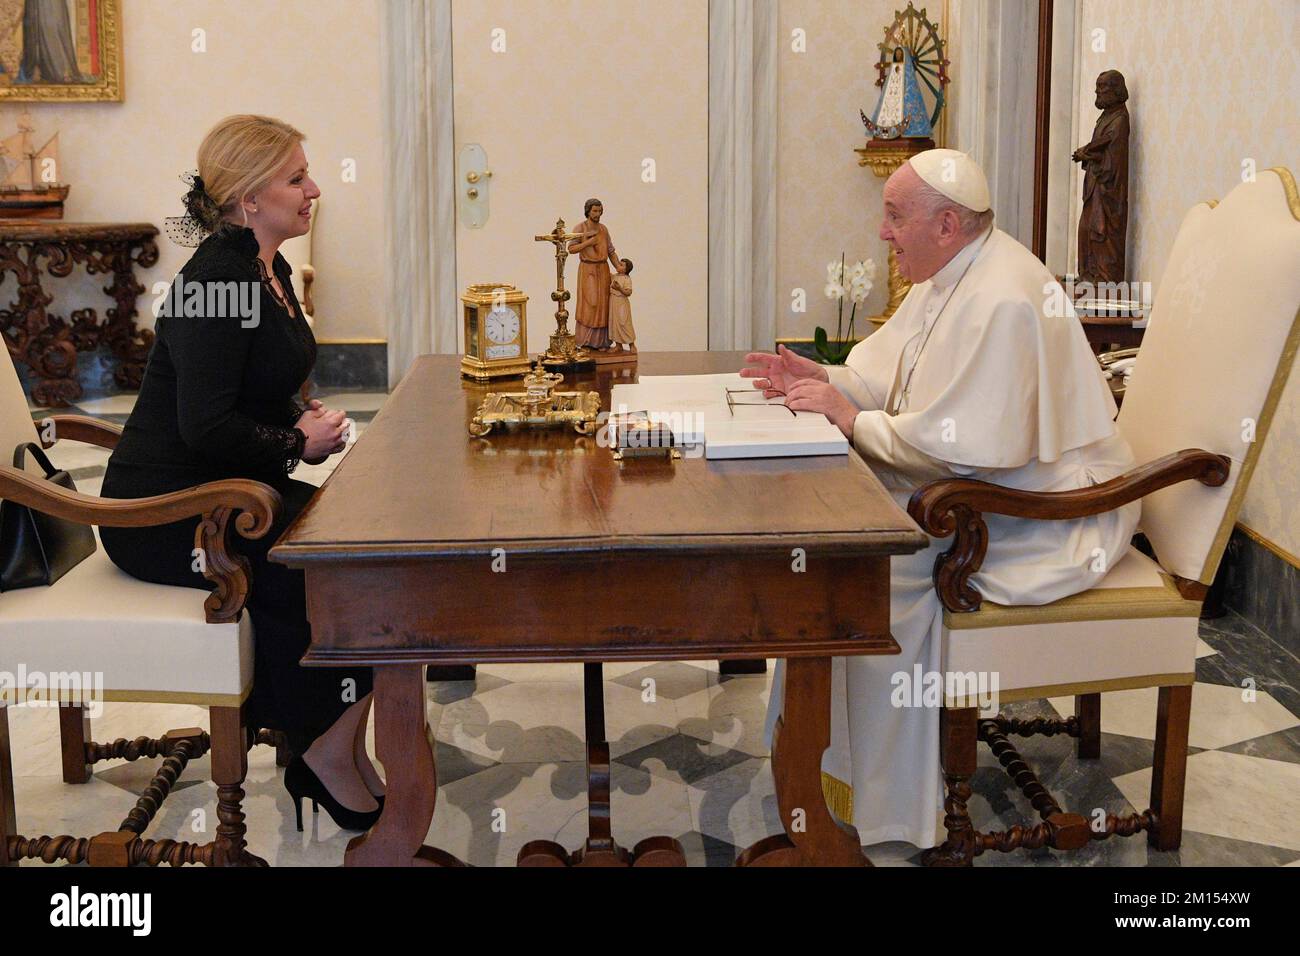 Vatican. 10th Dec, 2022. ITALY-VATICAN-REL DECEMBER 10, 2022 Pope Francis receives in private audience at the Vatican H.E. Mrs. Zuzana Caputova, President of the Slovak Republic H.E. Mrs. Zuzana Caputova, President of the Slovak RepublicITALIA-VATICANO-REL 10 DICEMBRE 2022 Papa Francesco riceve in udienza privata in Vaticano S.E. La Signora Zuzana Caputova, Presidente della Repubblica Slovacca S.E. La Signora Zuzana Caputova, Presidente della Repubblica Slovacca Photograph by Vatican Mediia/Catholic Press Photo RESTRICTED TO EDITORIAL USE - NO MARKETING - NO ADVERTISING CAMPAIGNS. Credit: Inde Stock Photo